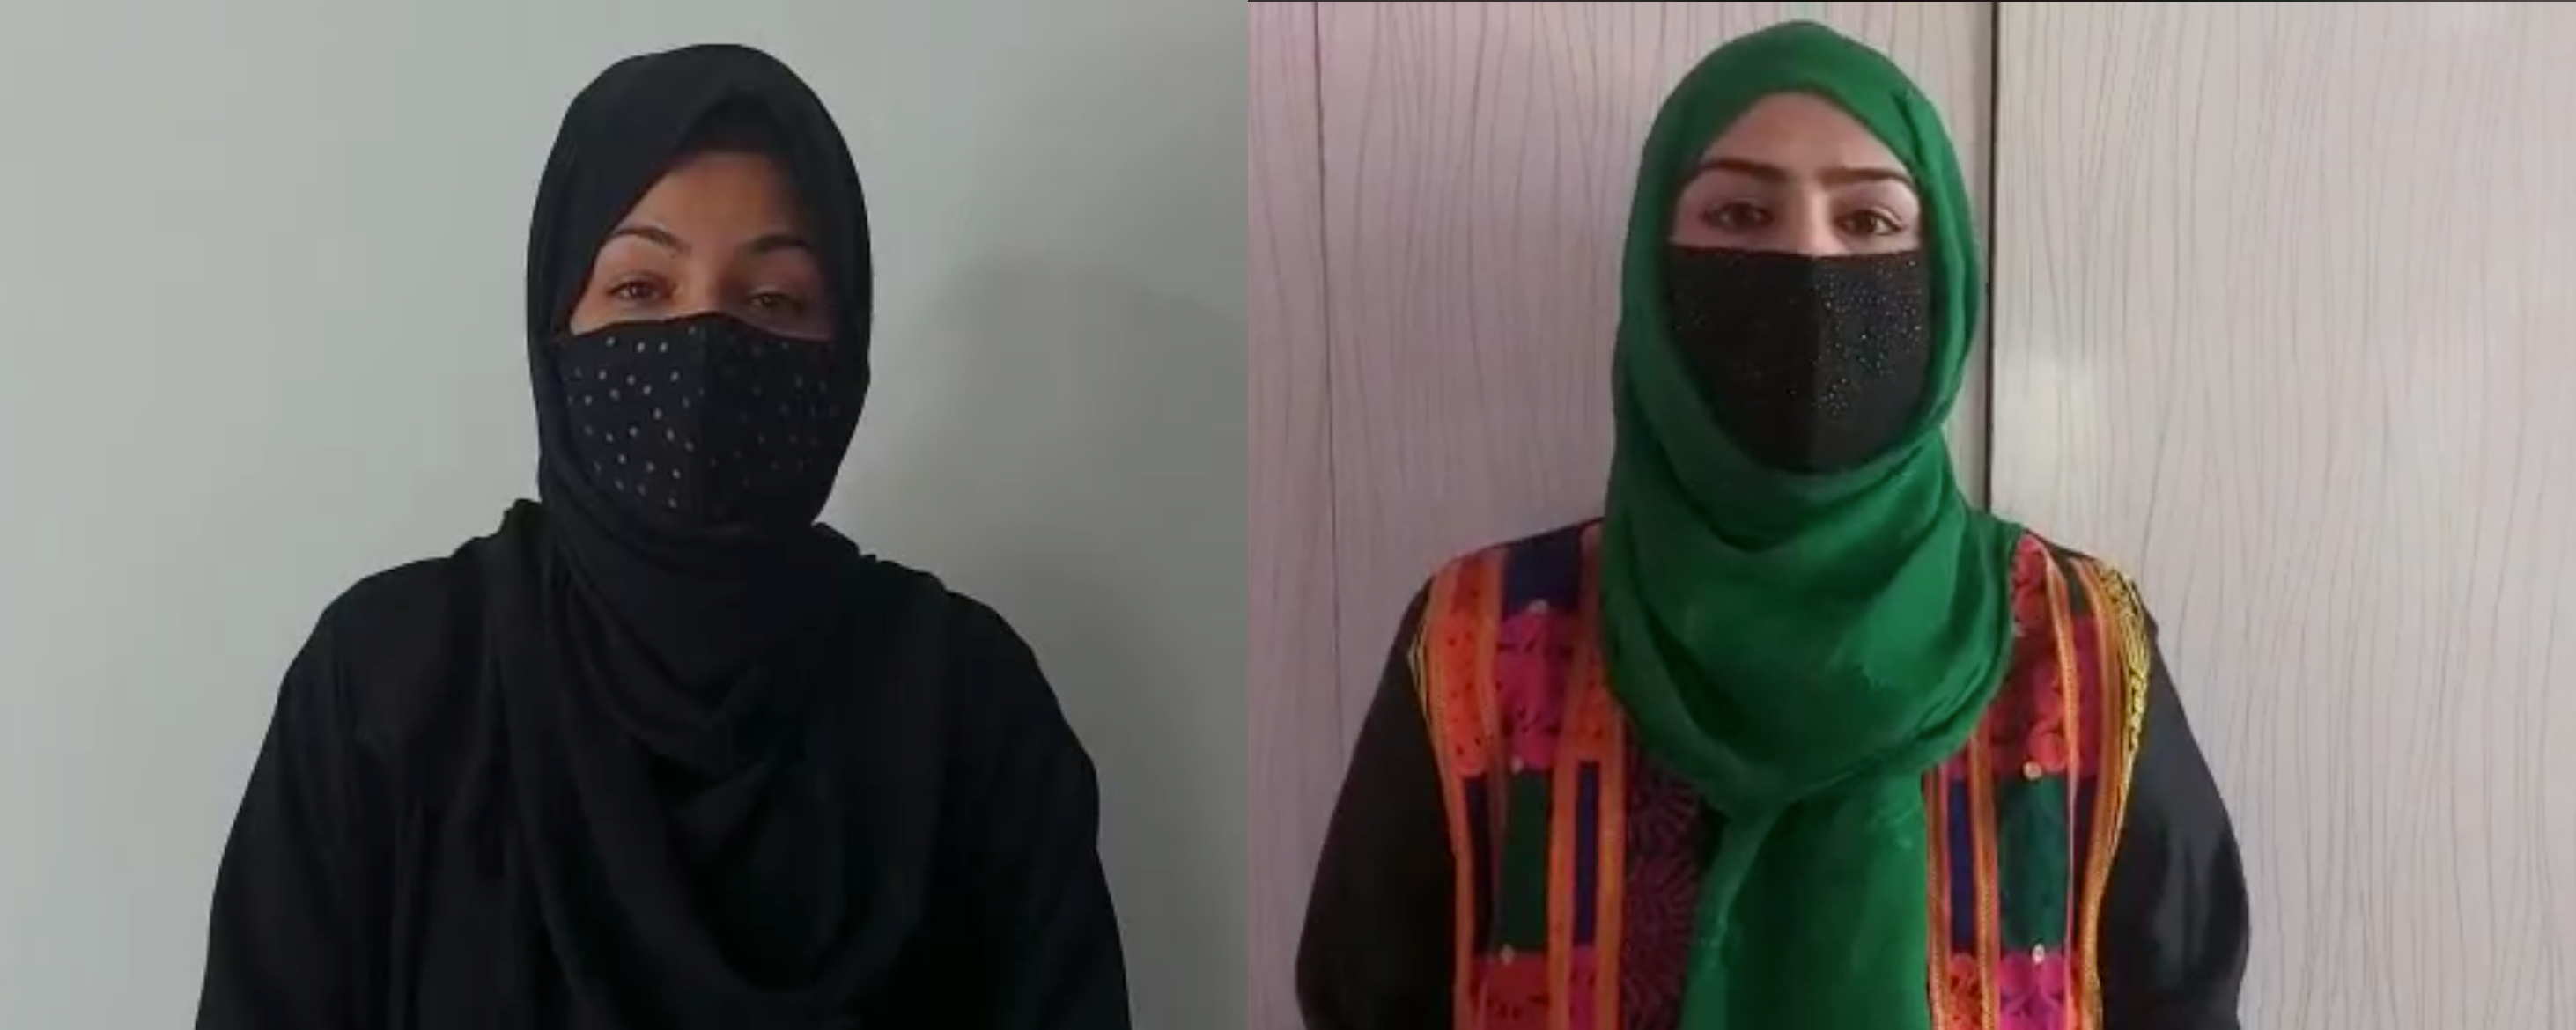 Two Afghan women stand with burqas on.